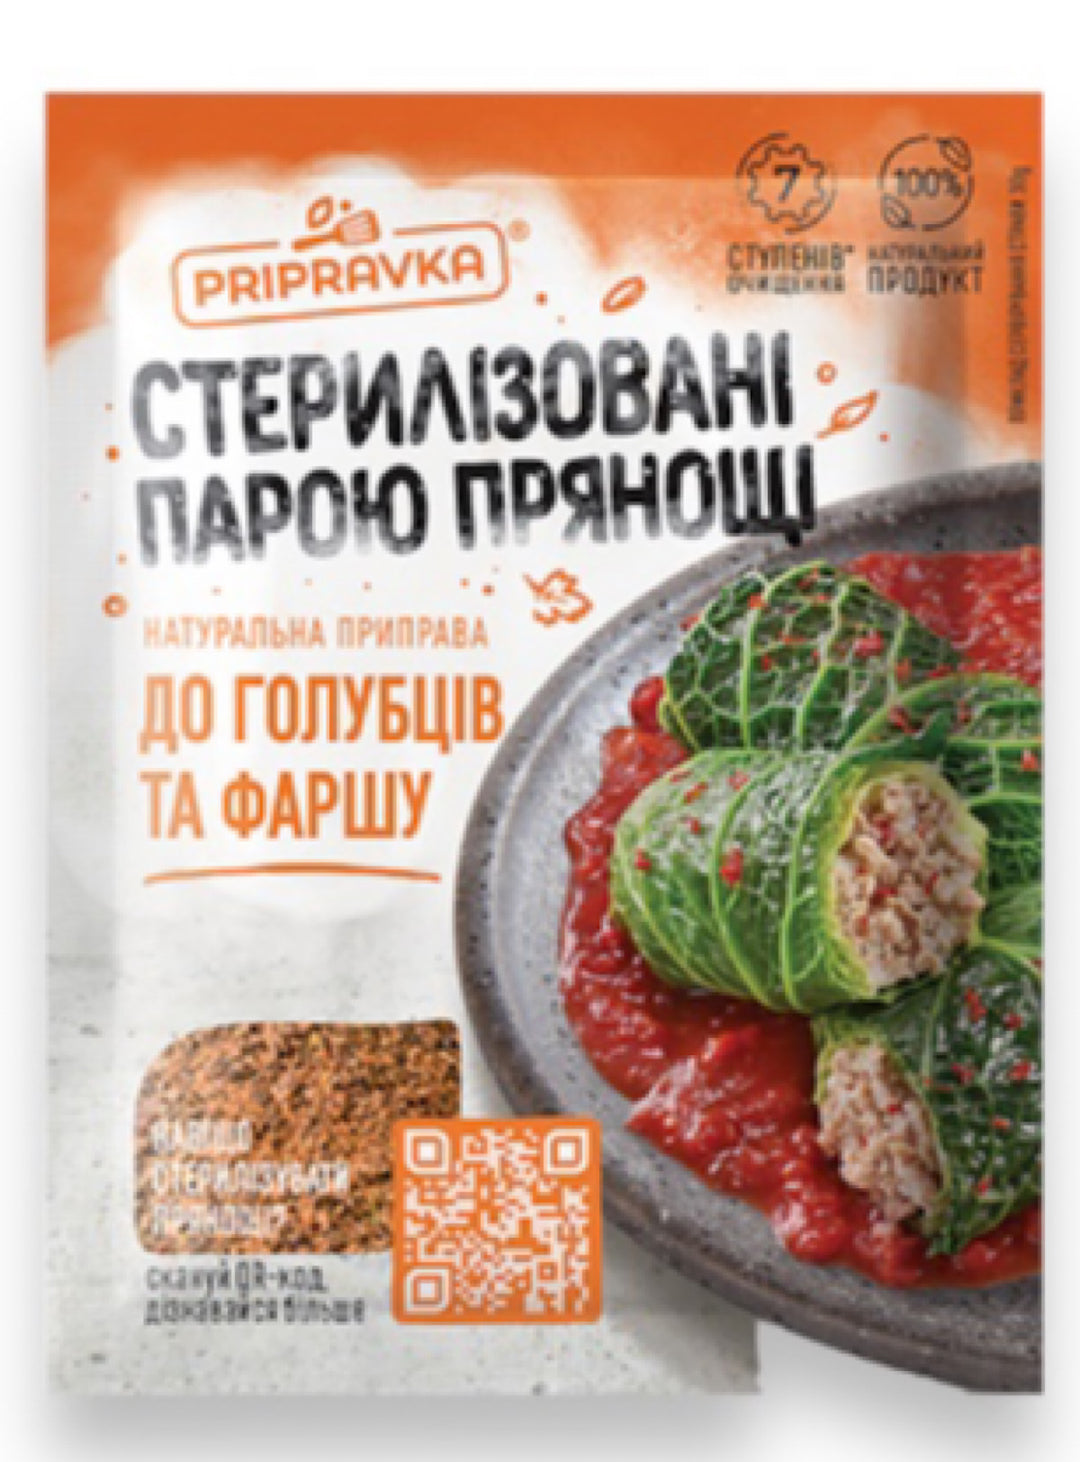 Seasoning for Ground Meat and Cabbage Rolls - Pripravka - 30g